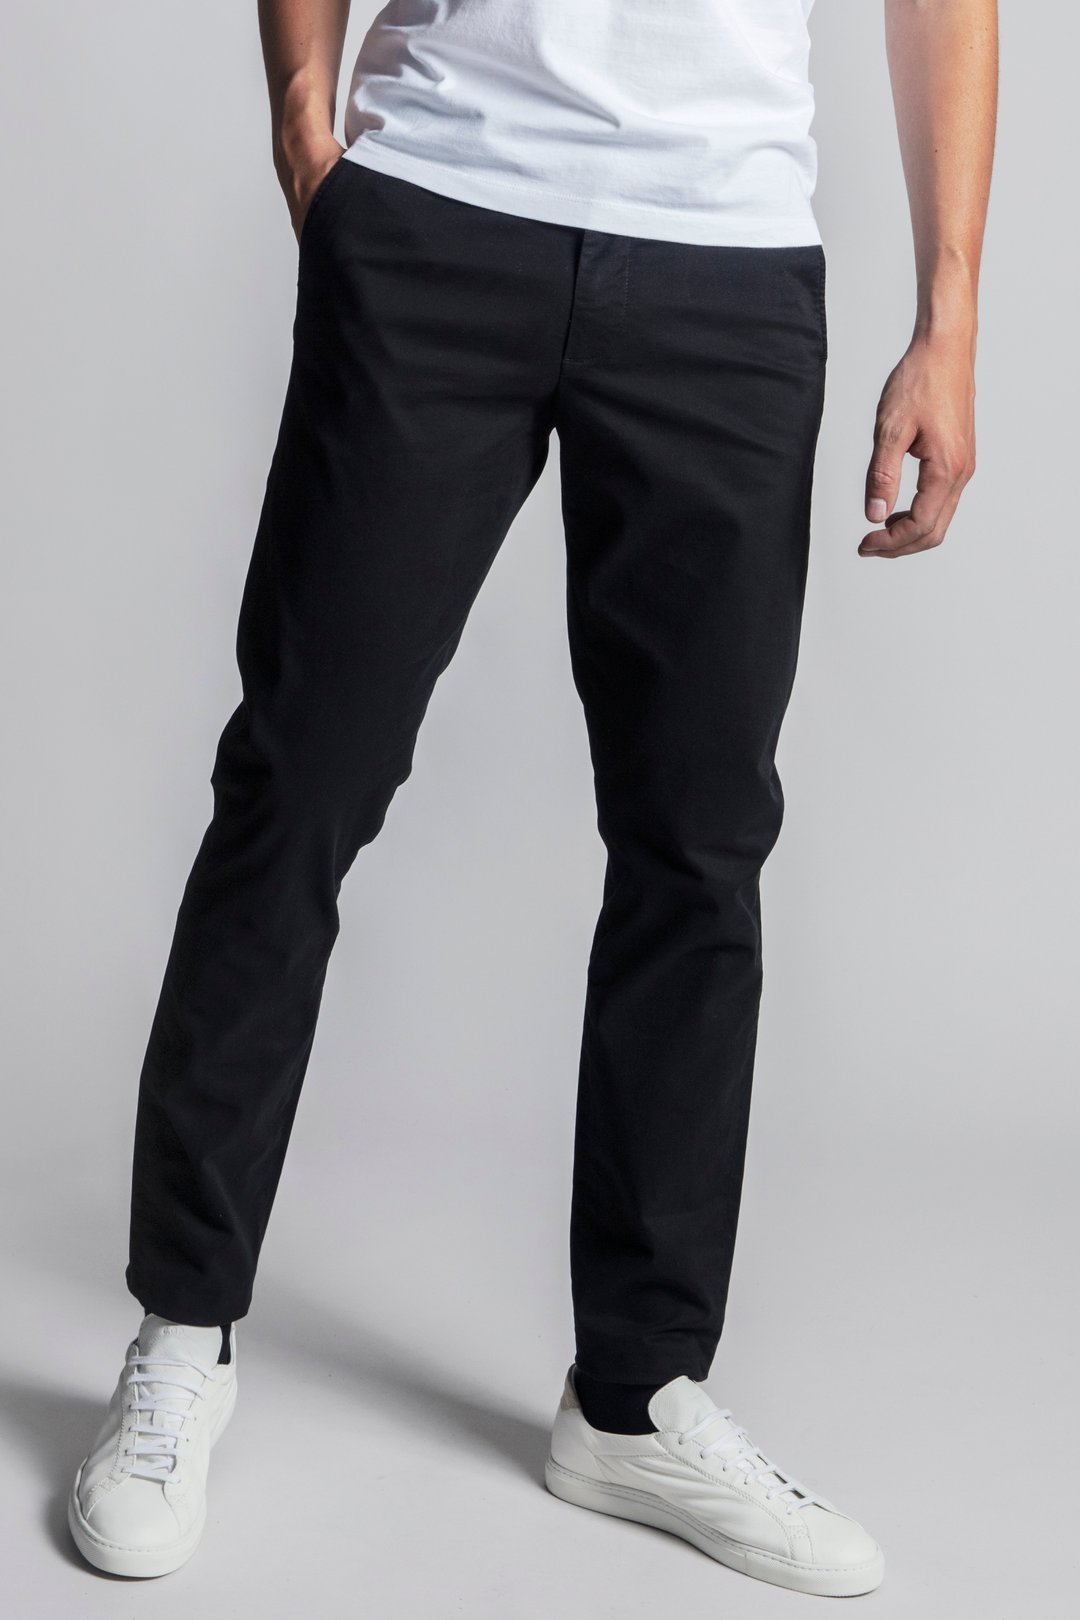 Black Chino | Tapered Cotton Stretch Trouser - ASKET